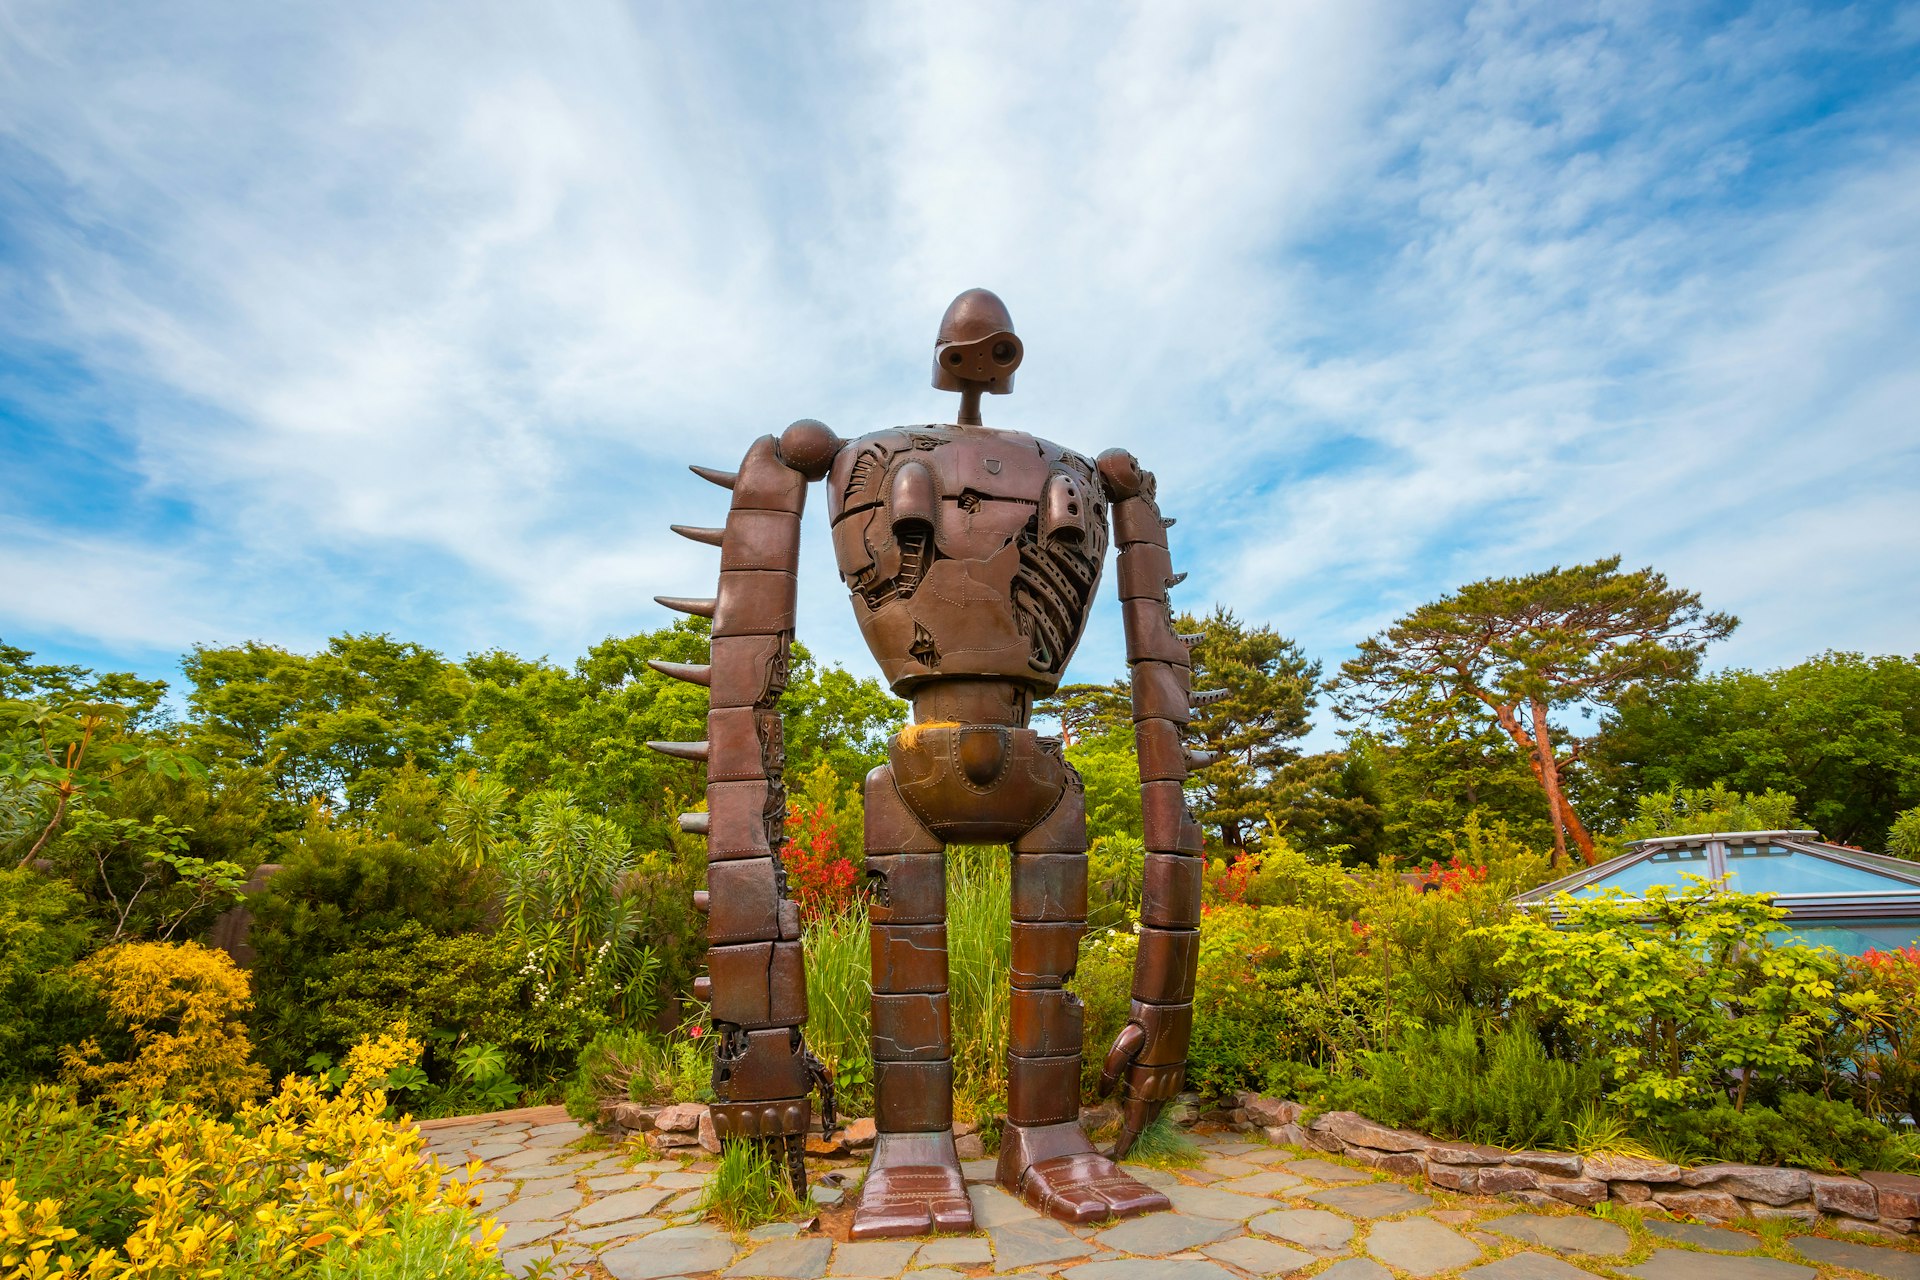 A picture of the statue of the Robot from Castle In The Sky